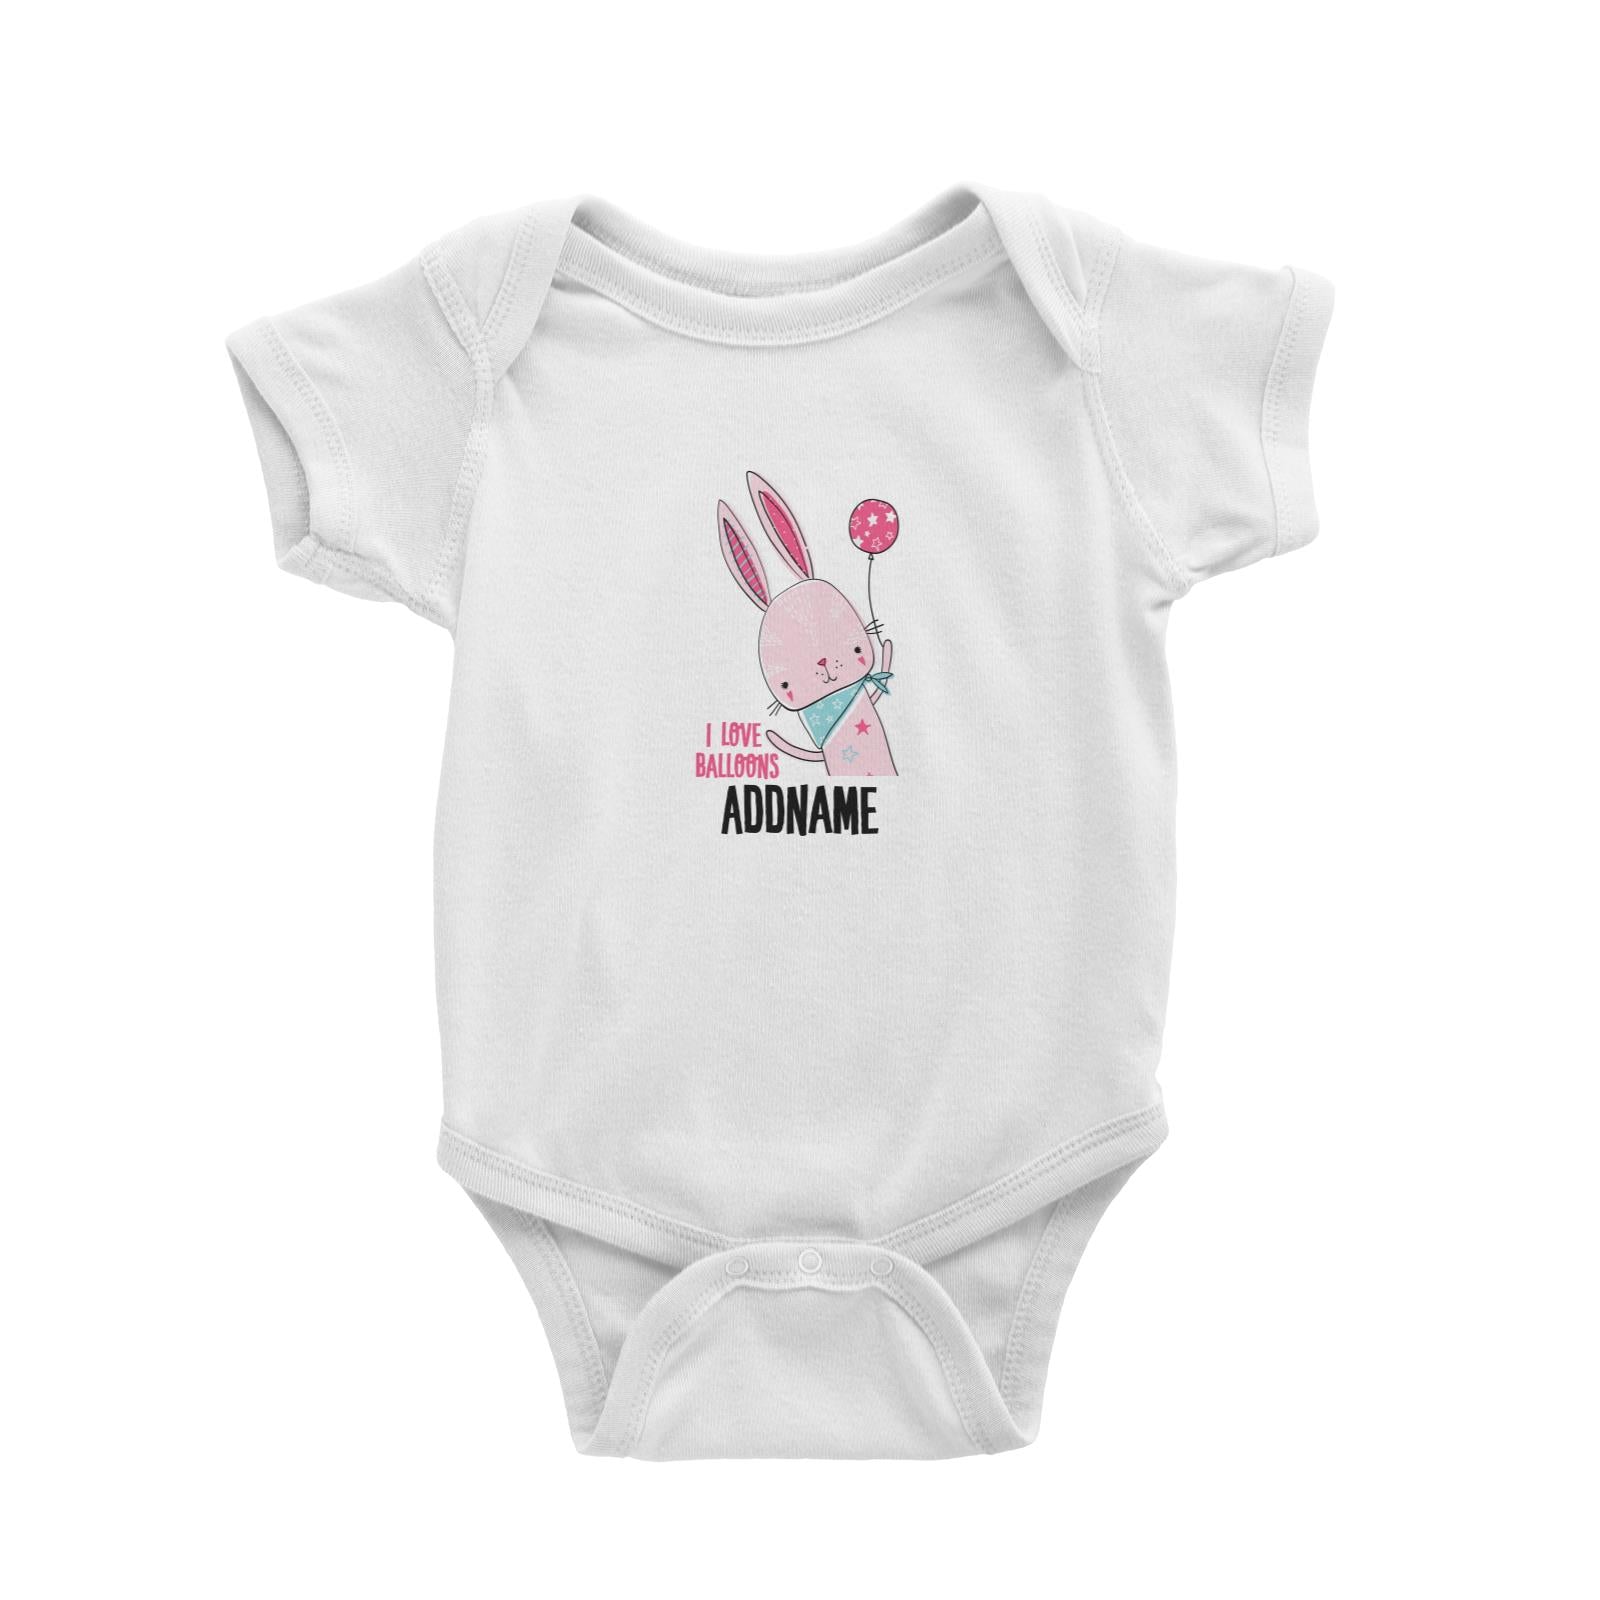 Cool Vibrant Series I Love Balloons Addname Baby Romper [SALE]